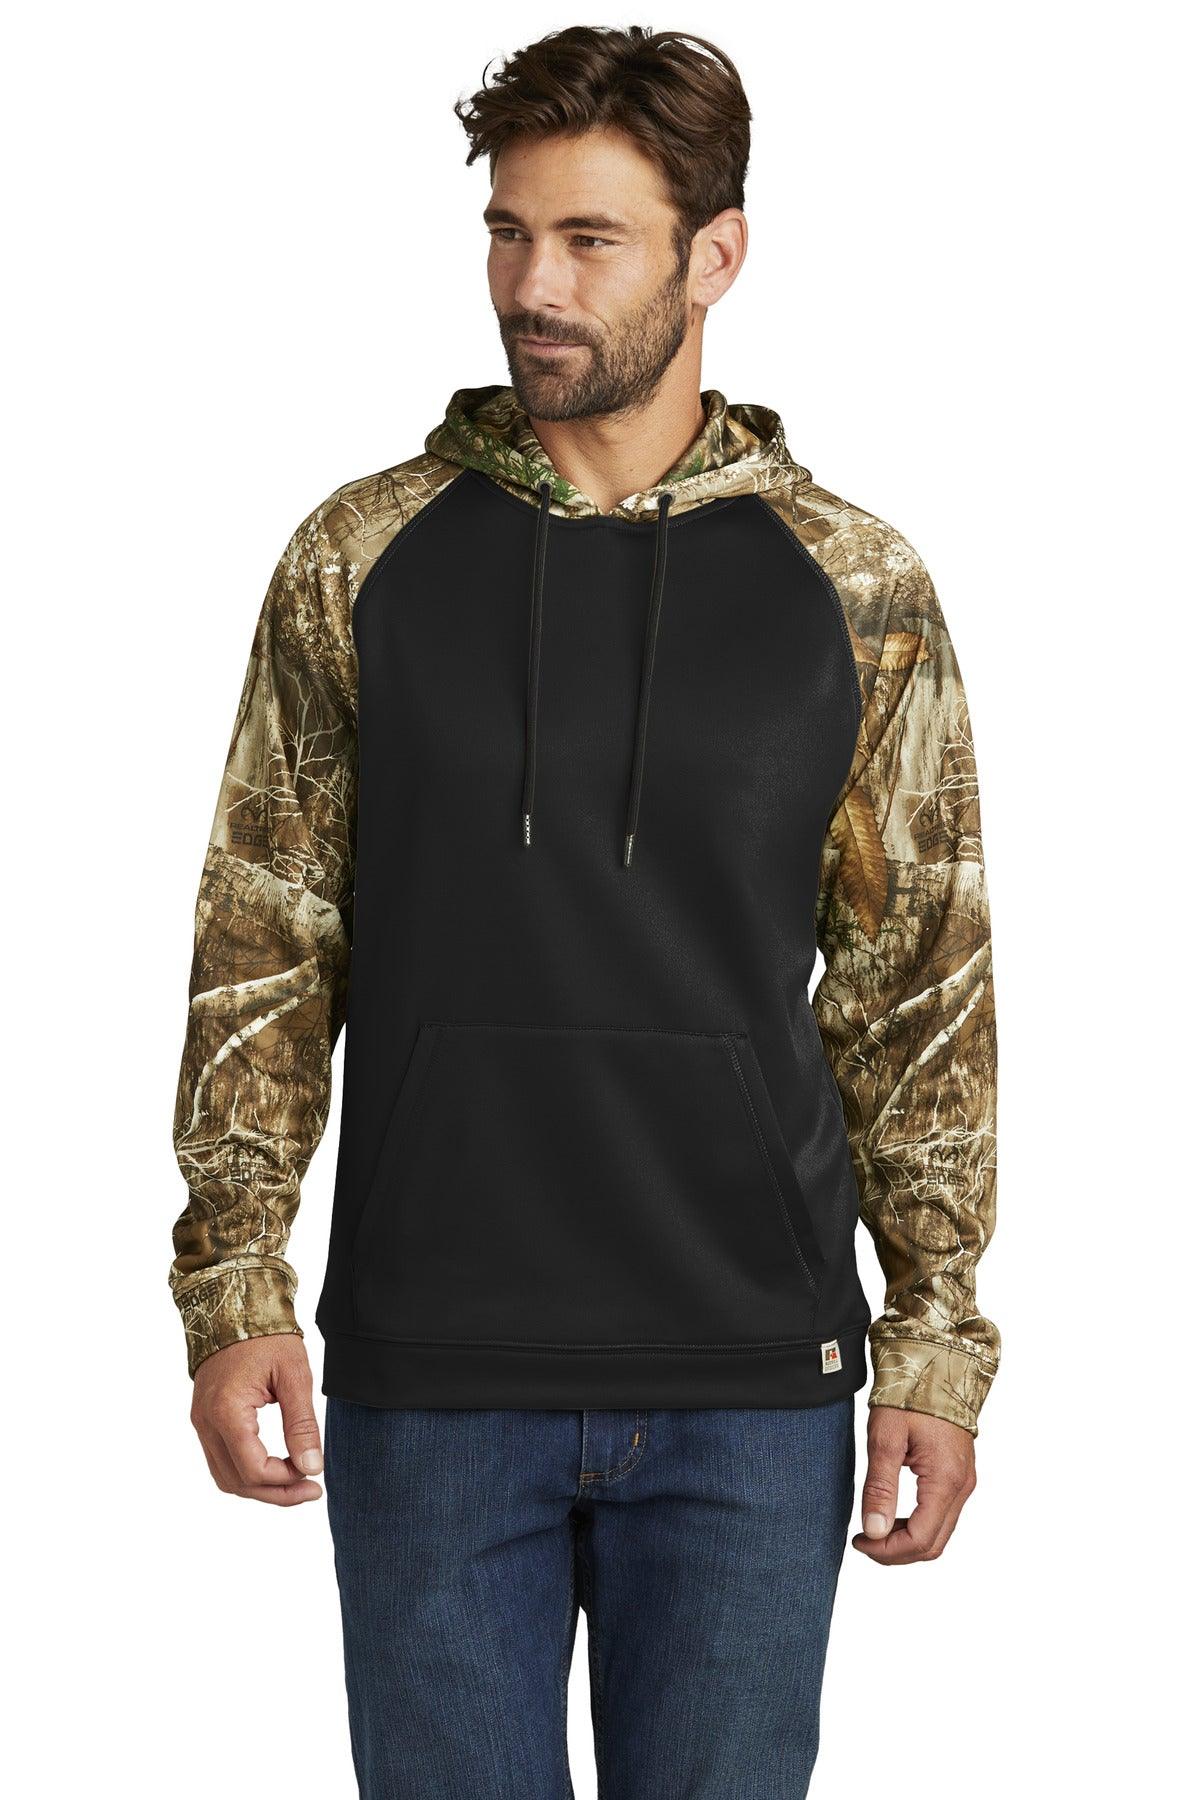 Russell Outdoors Realtree Performance Colorblock Pullover Hoodie RU451 - Dresses Max